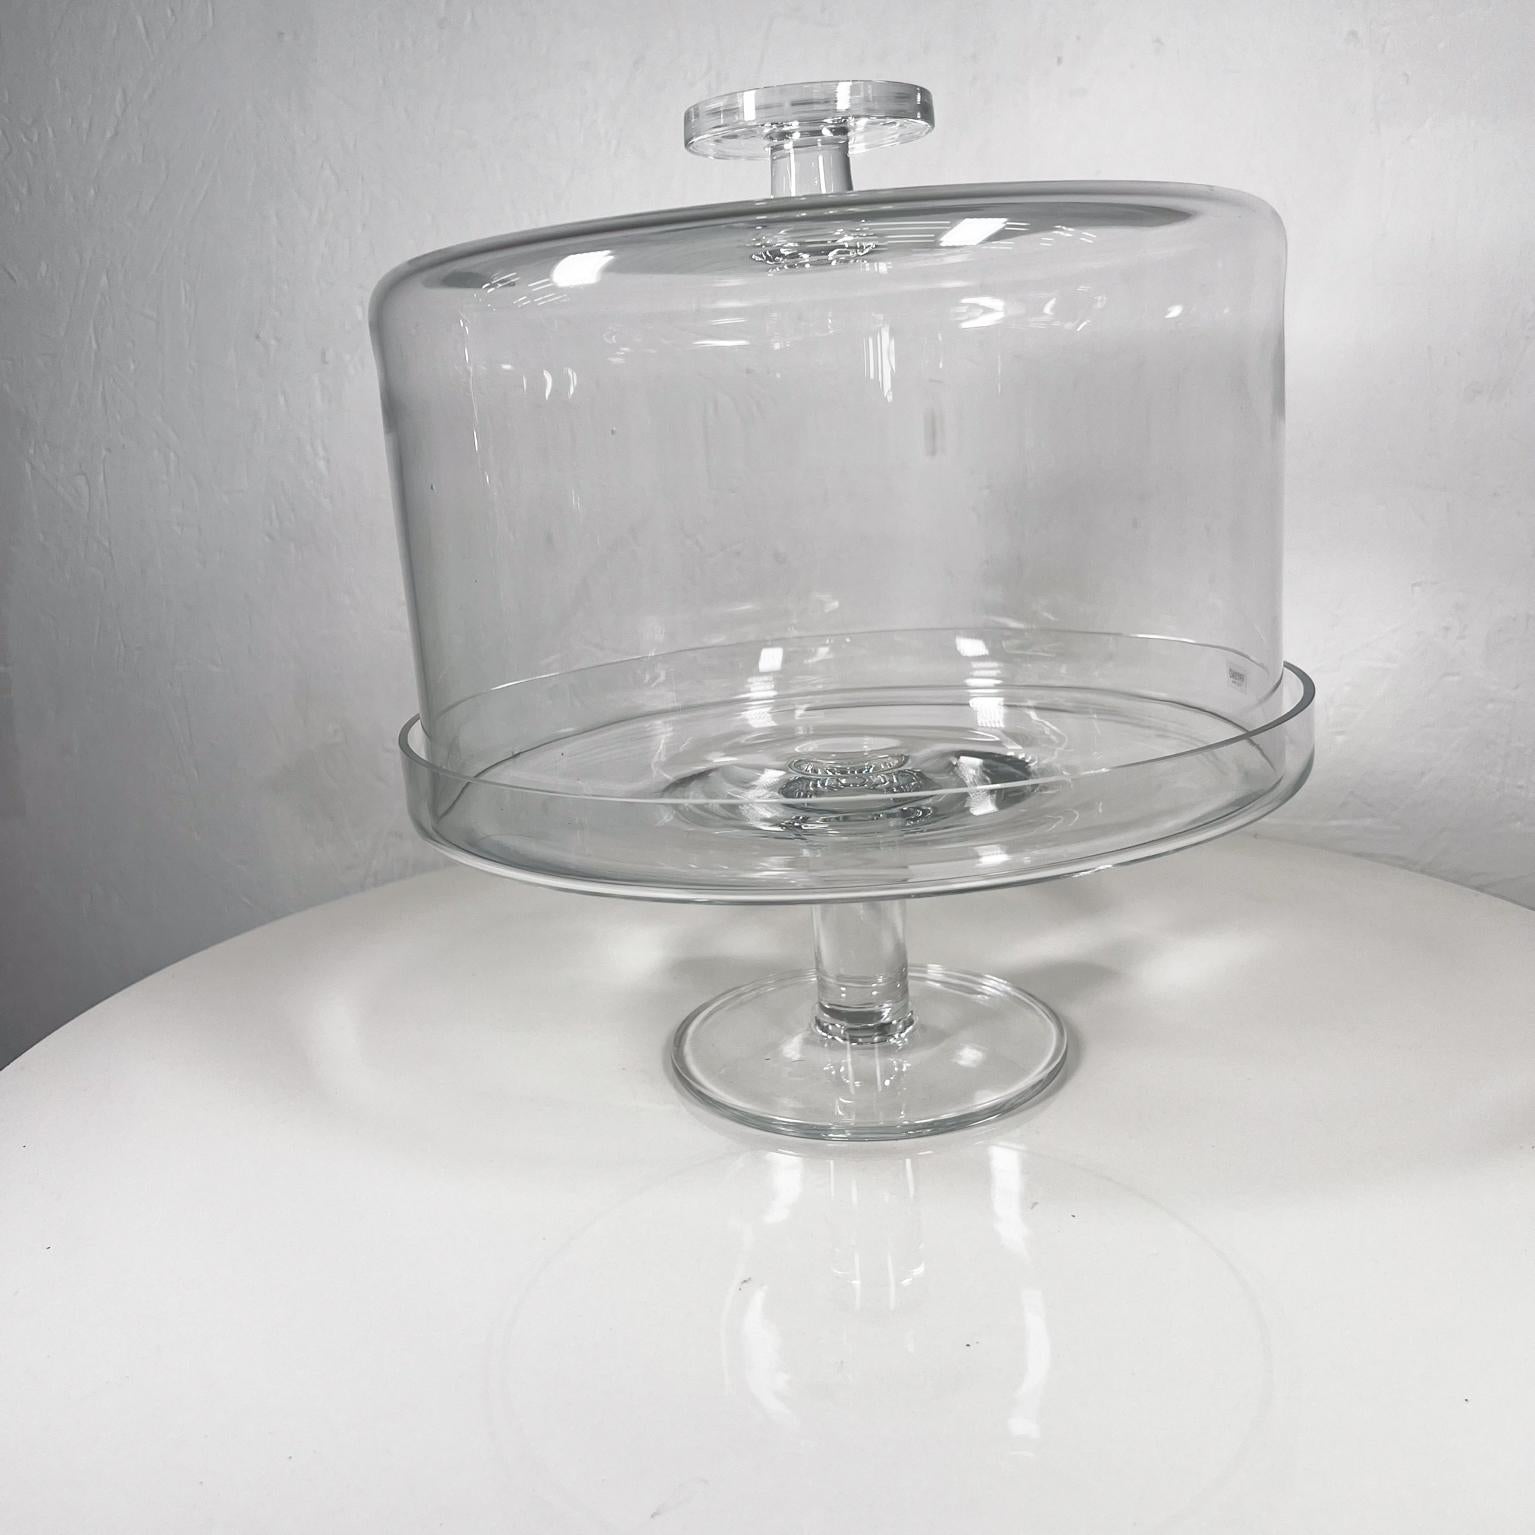 Contemporary Exquisite Modern Large Domed Pedestal Glass Cake Stand